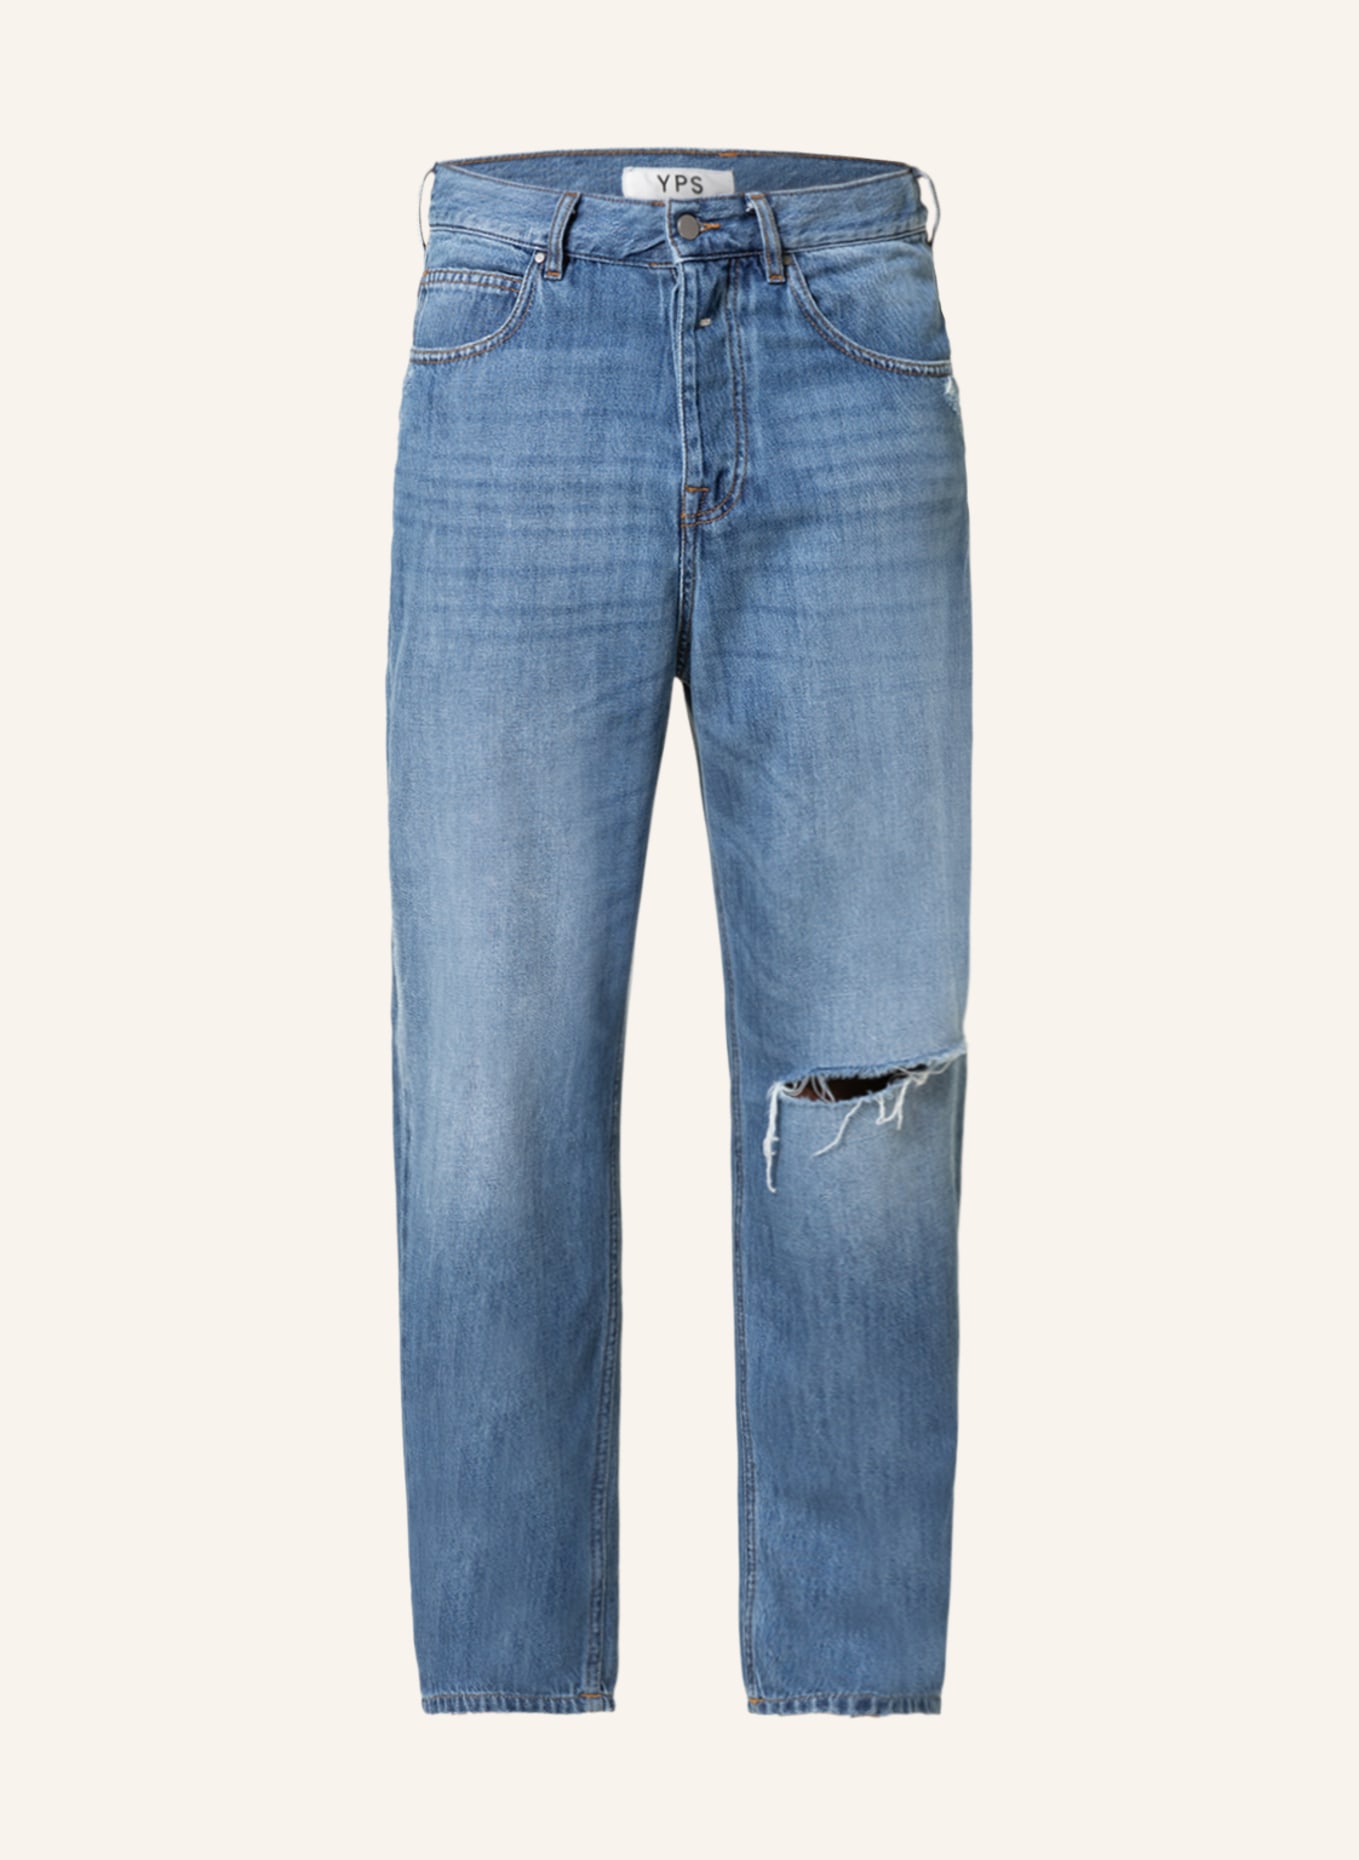 YOUNG POETS Destroyed jeans TONI tapered fit, Color: 522 Mid Blue (Image 1)